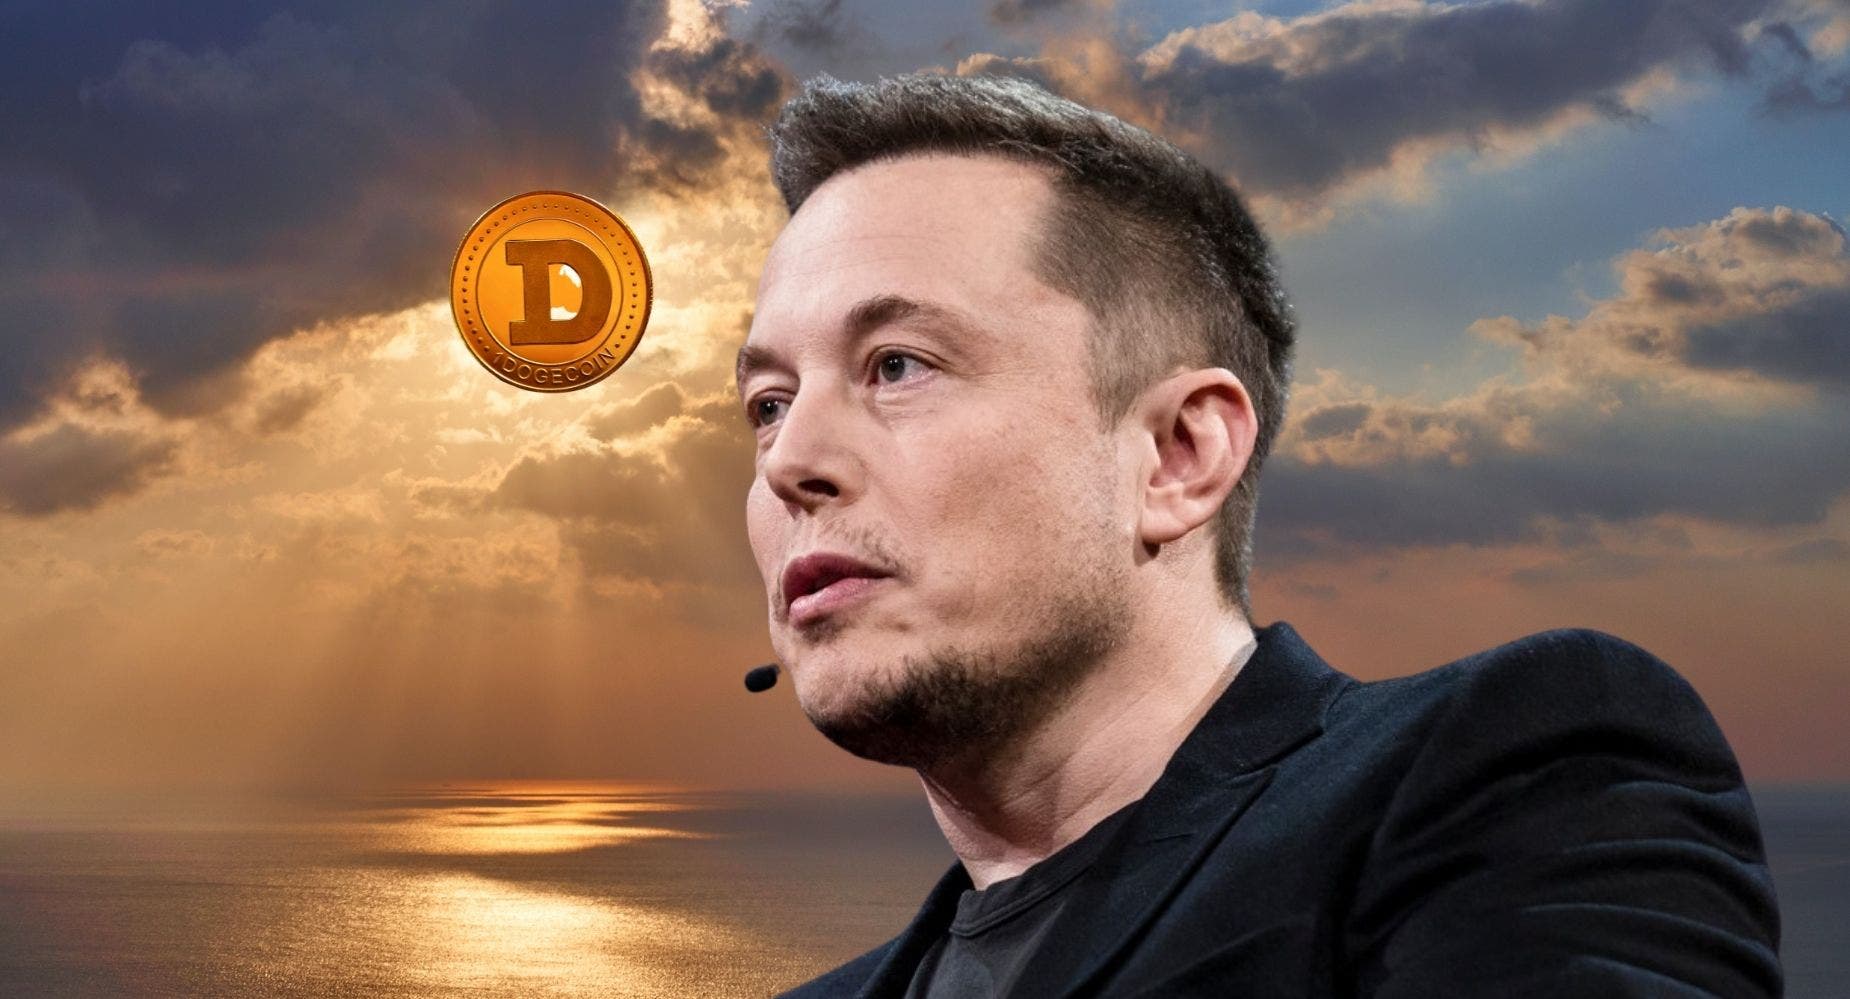 If You Invested $100 When Elon Musk First Tweeted About Dogecoin, Here's How Much You'd Have Now